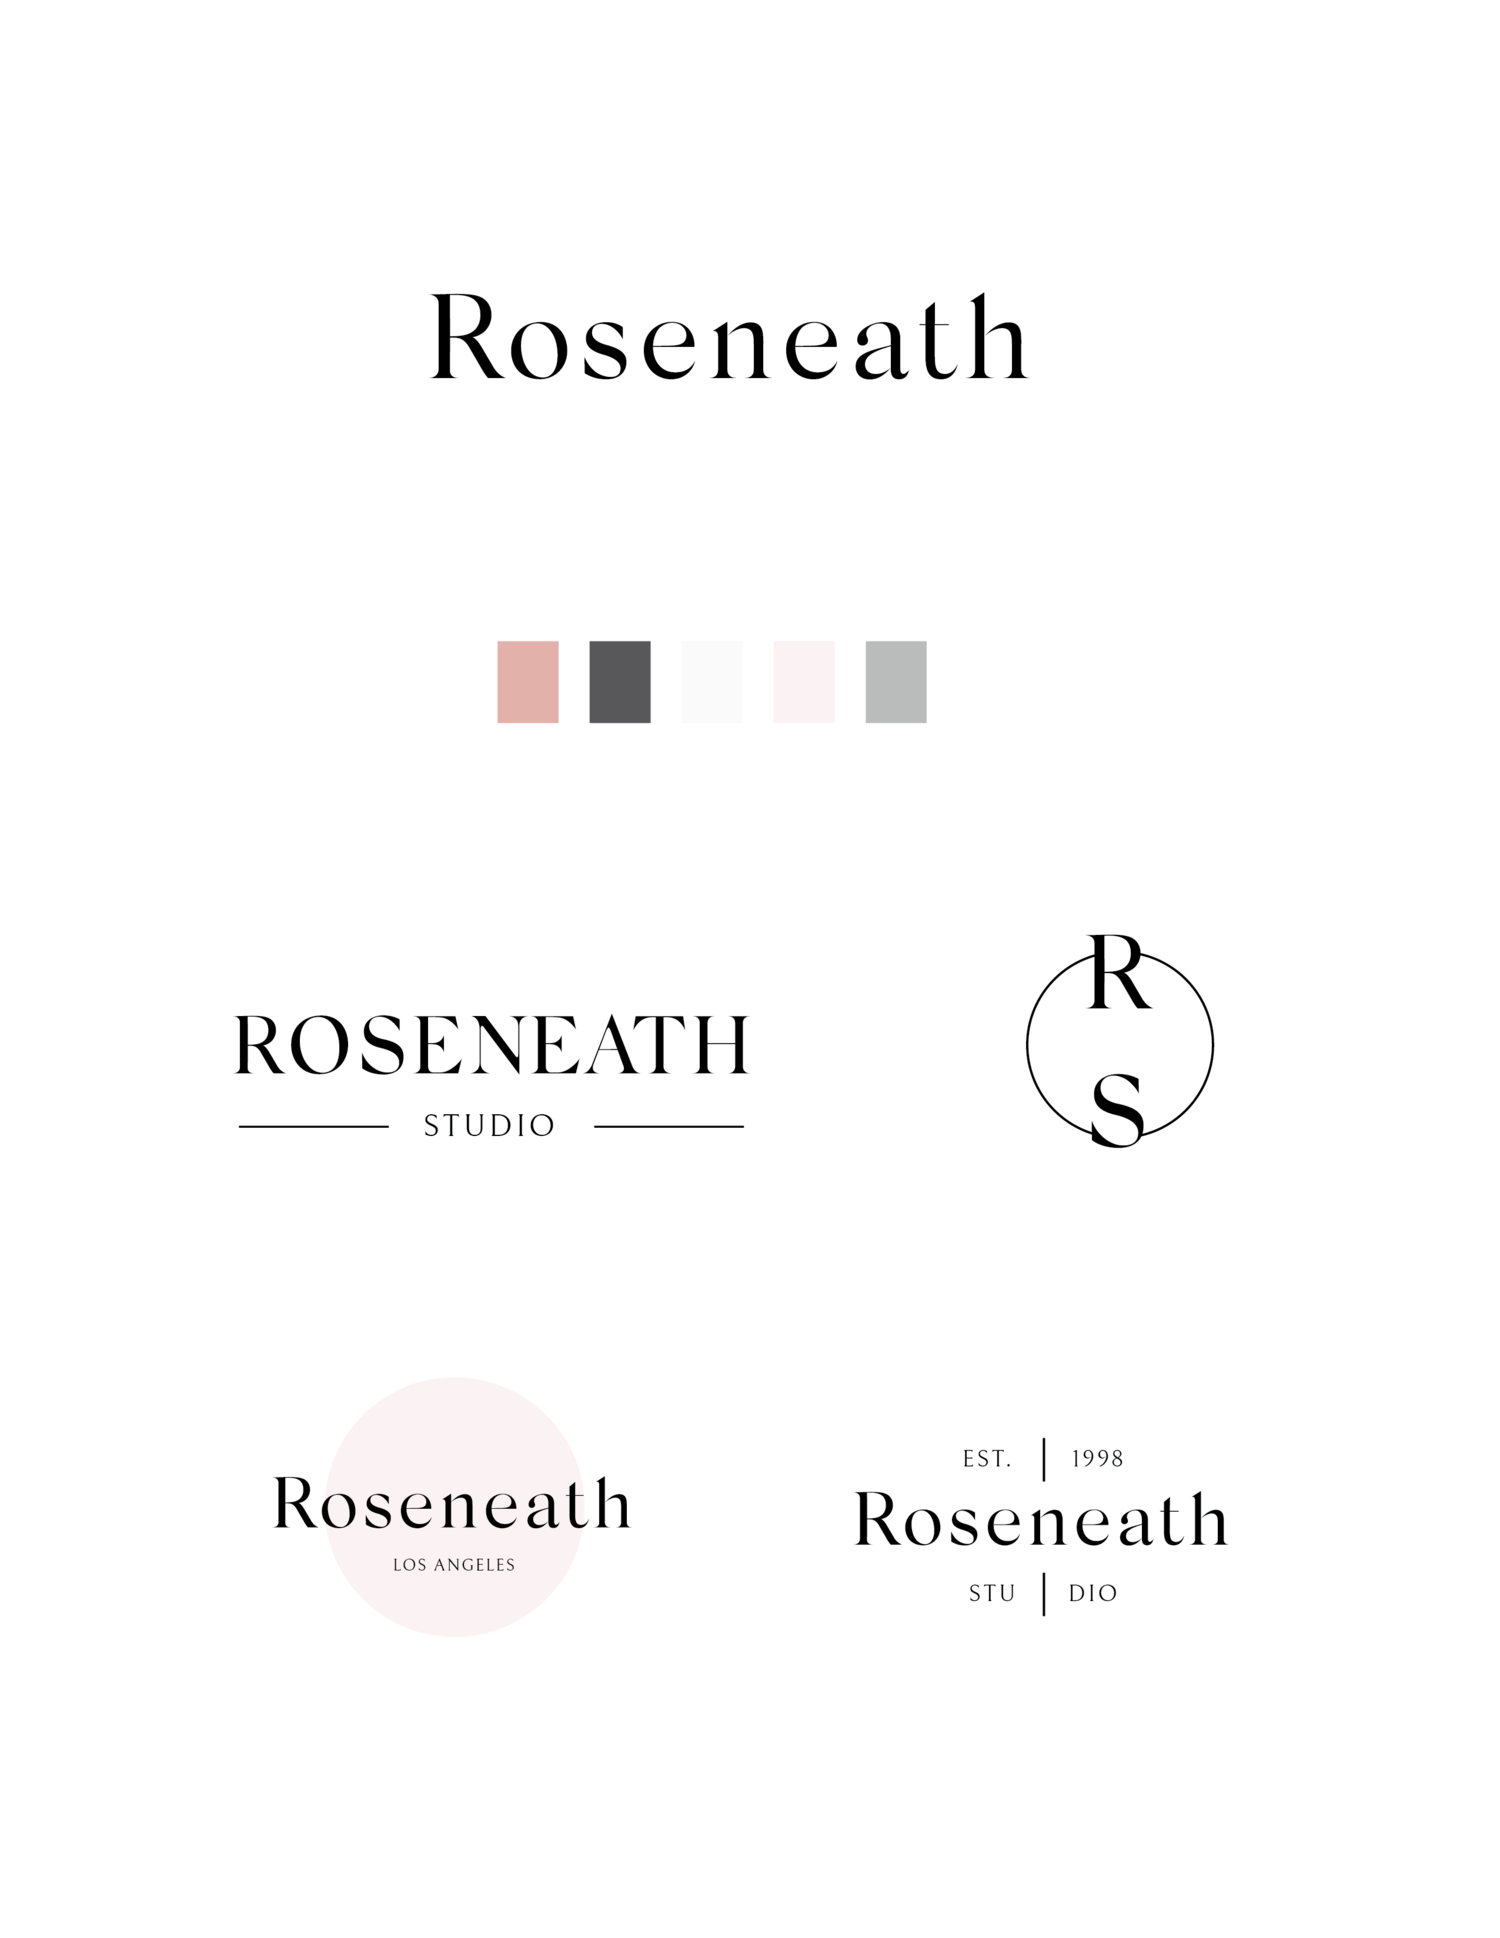 Roseneath brand kit by Jordan Cotton as an example of one of 5 Brand Kit Examples to Inspire Your Brand Identity.